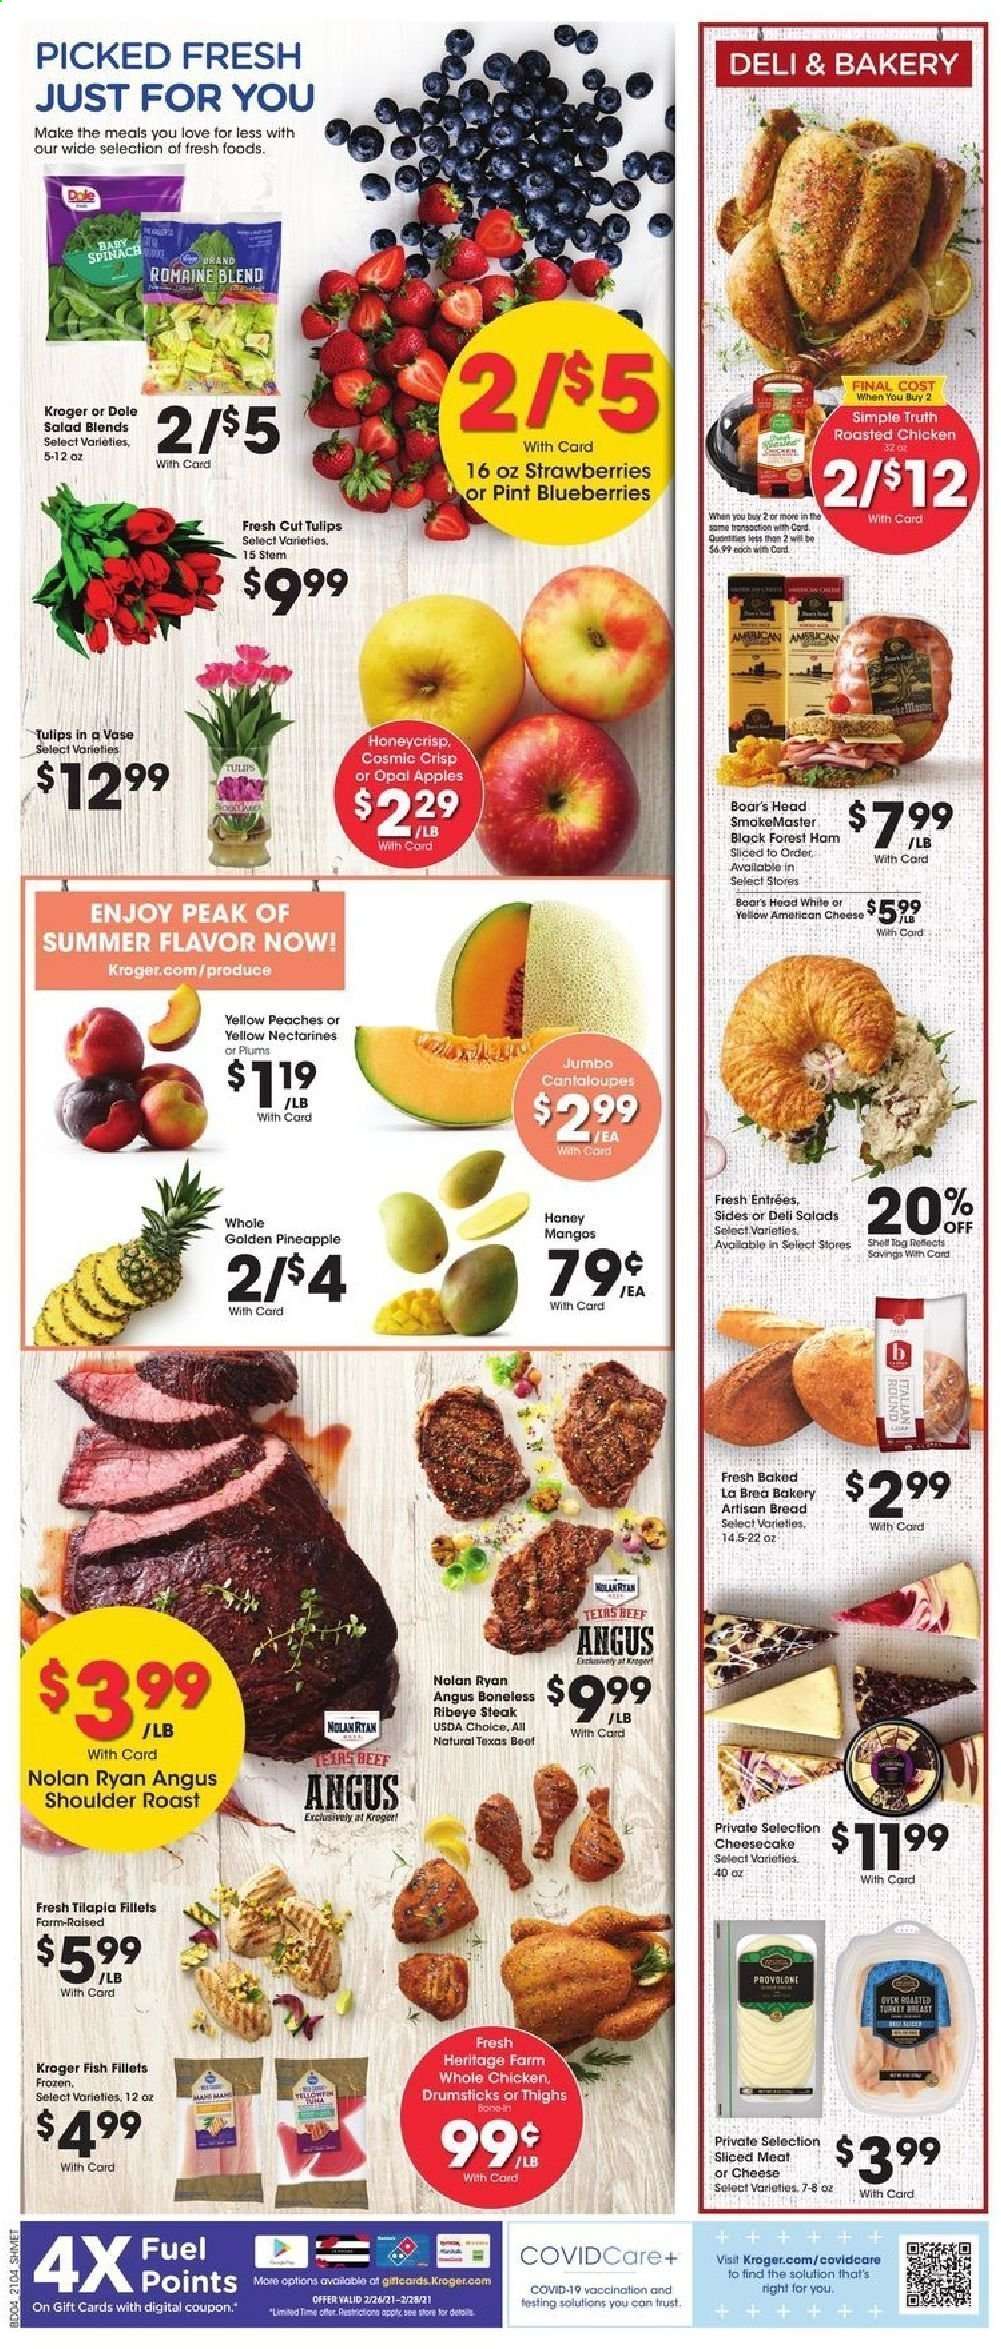 thumbnail - Kroger Flyer - 02/24/2021 - 03/02/2021 - Sales products - vase, Trust, blueberries, plums, Dole, bread, apples, fish fillets, tilapia, fish, salad, ham, american cheese, mango, spinach, strawberries, cantaloupe, whole chicken, beef meat, beef steak, steak, ribeye steak, tulip. Page 7.